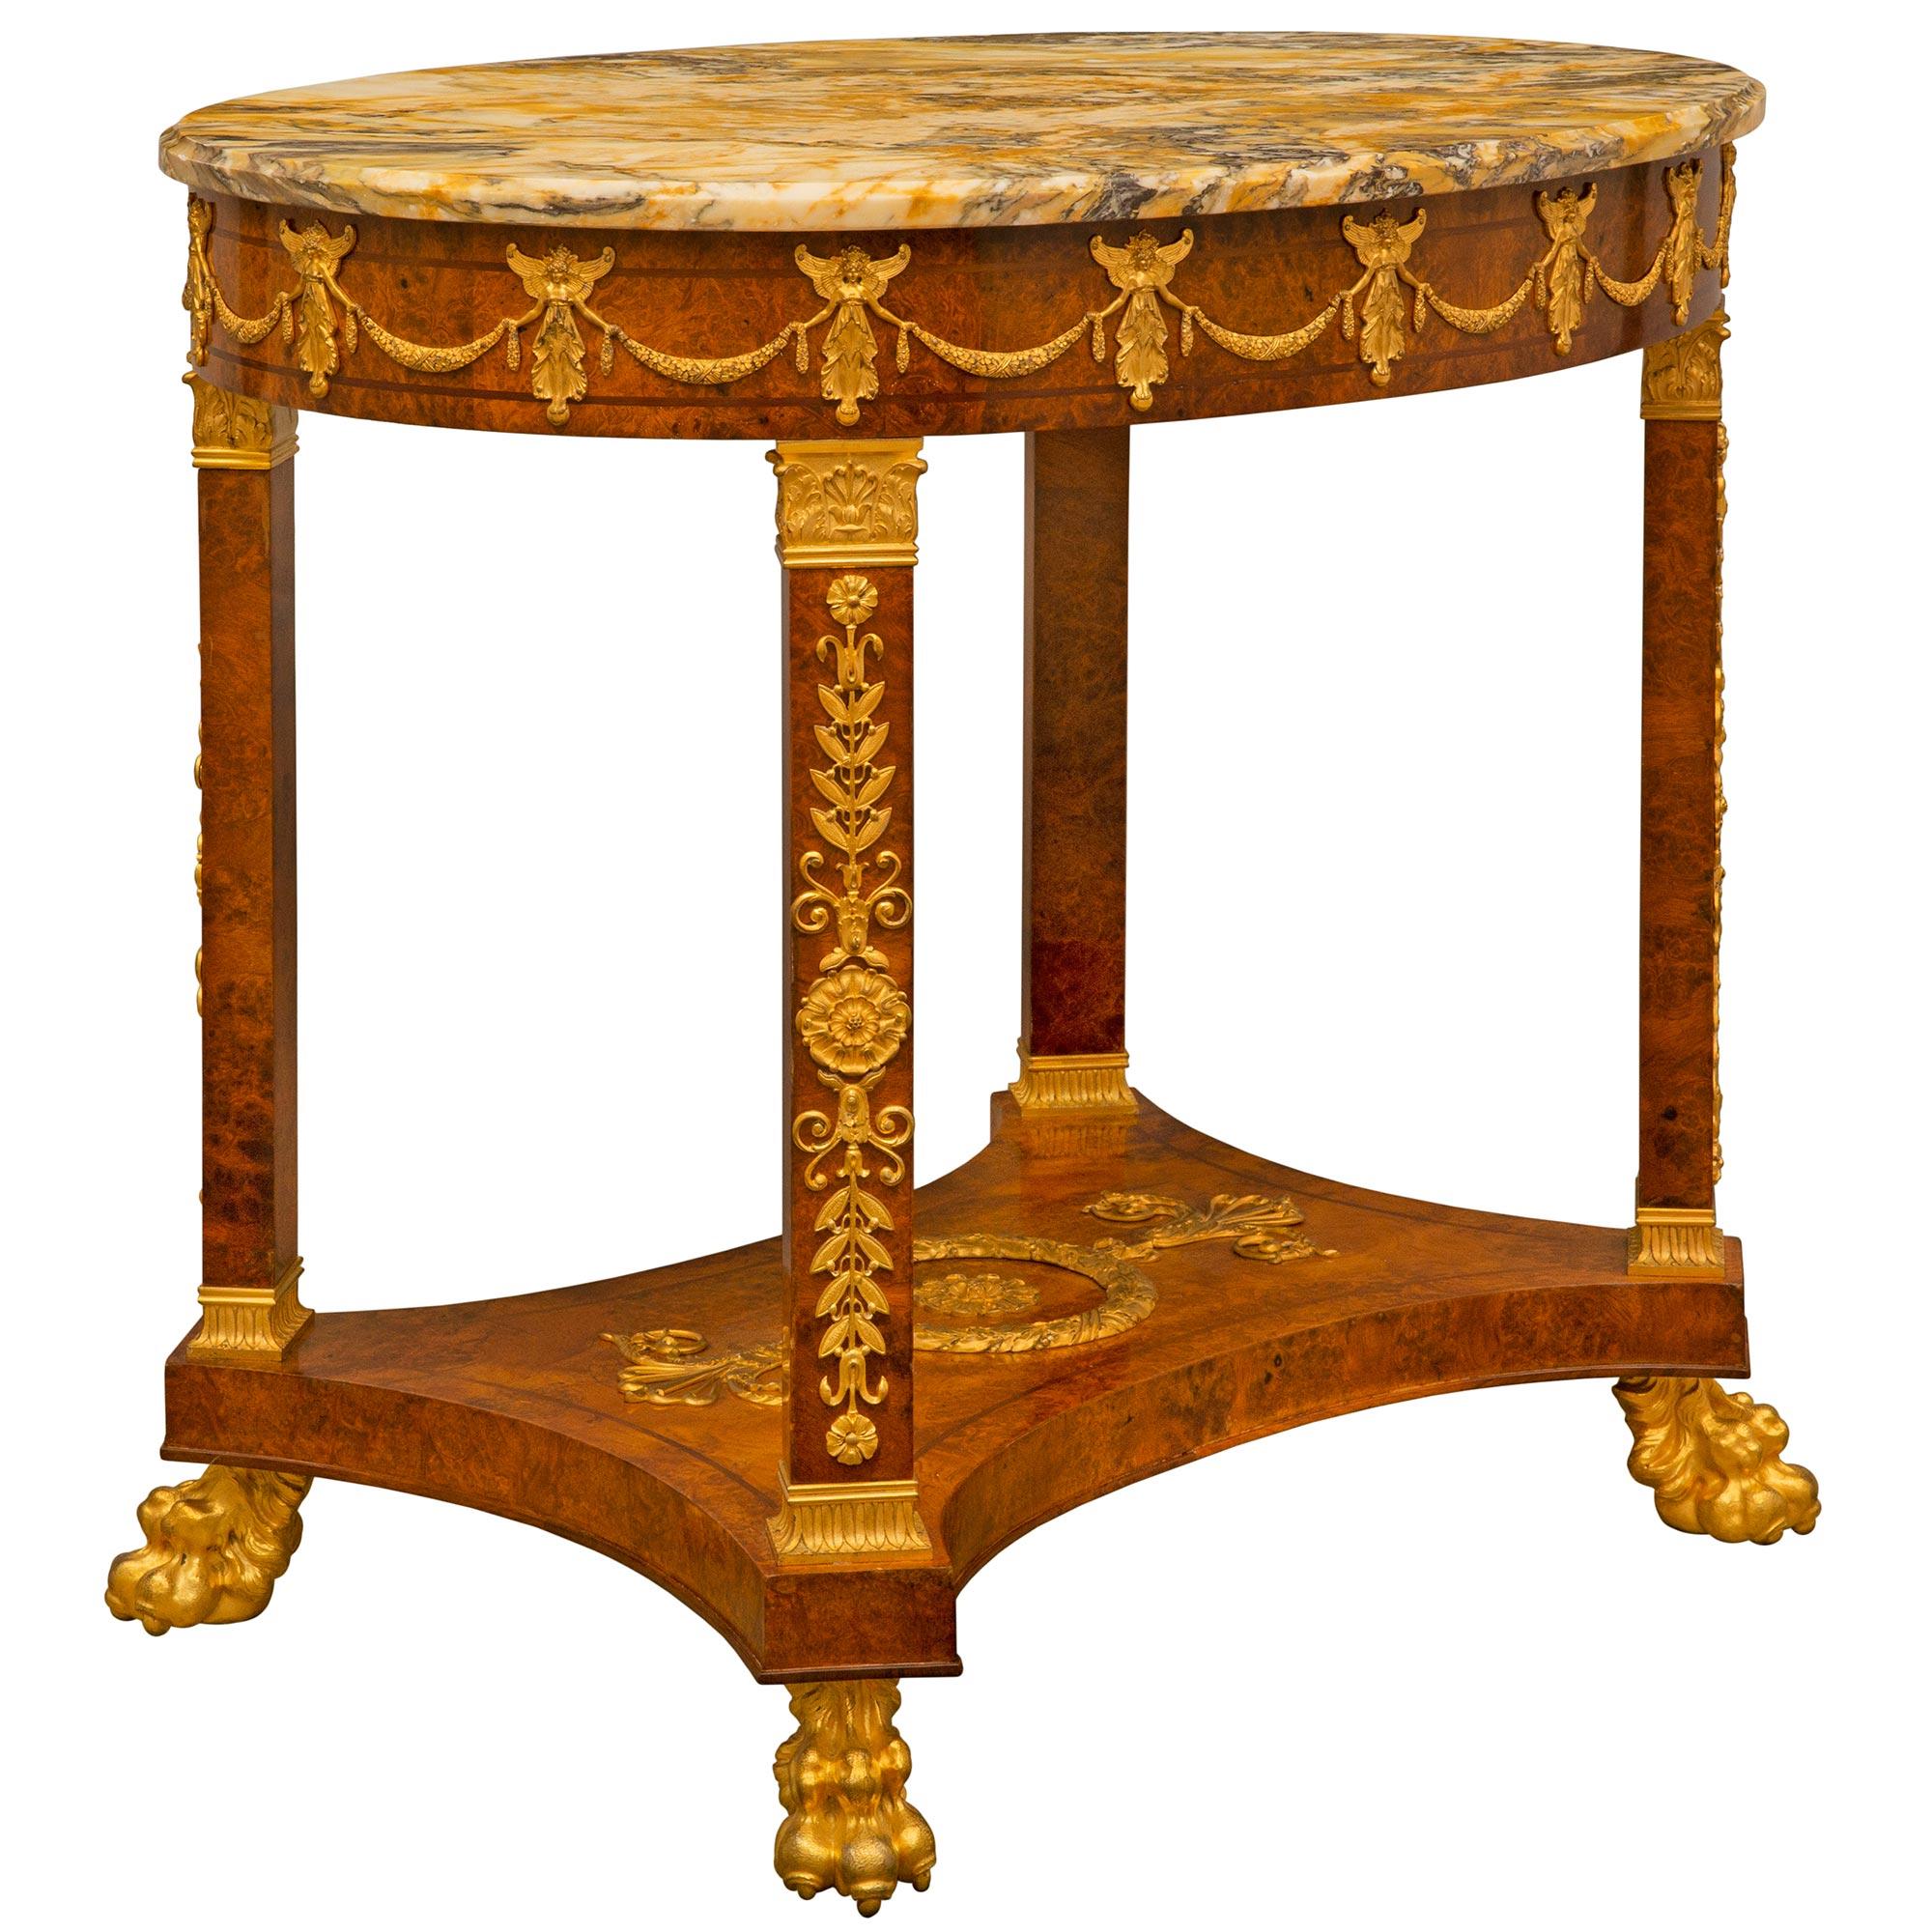 A handsome and extremely high quality French 19th century Empire st. burl Walnut, ormolu and Jaune de Sienne marble side table. The oblong shaped table is raised by impressive richly chased ormolu paw feet below striking column like supports with